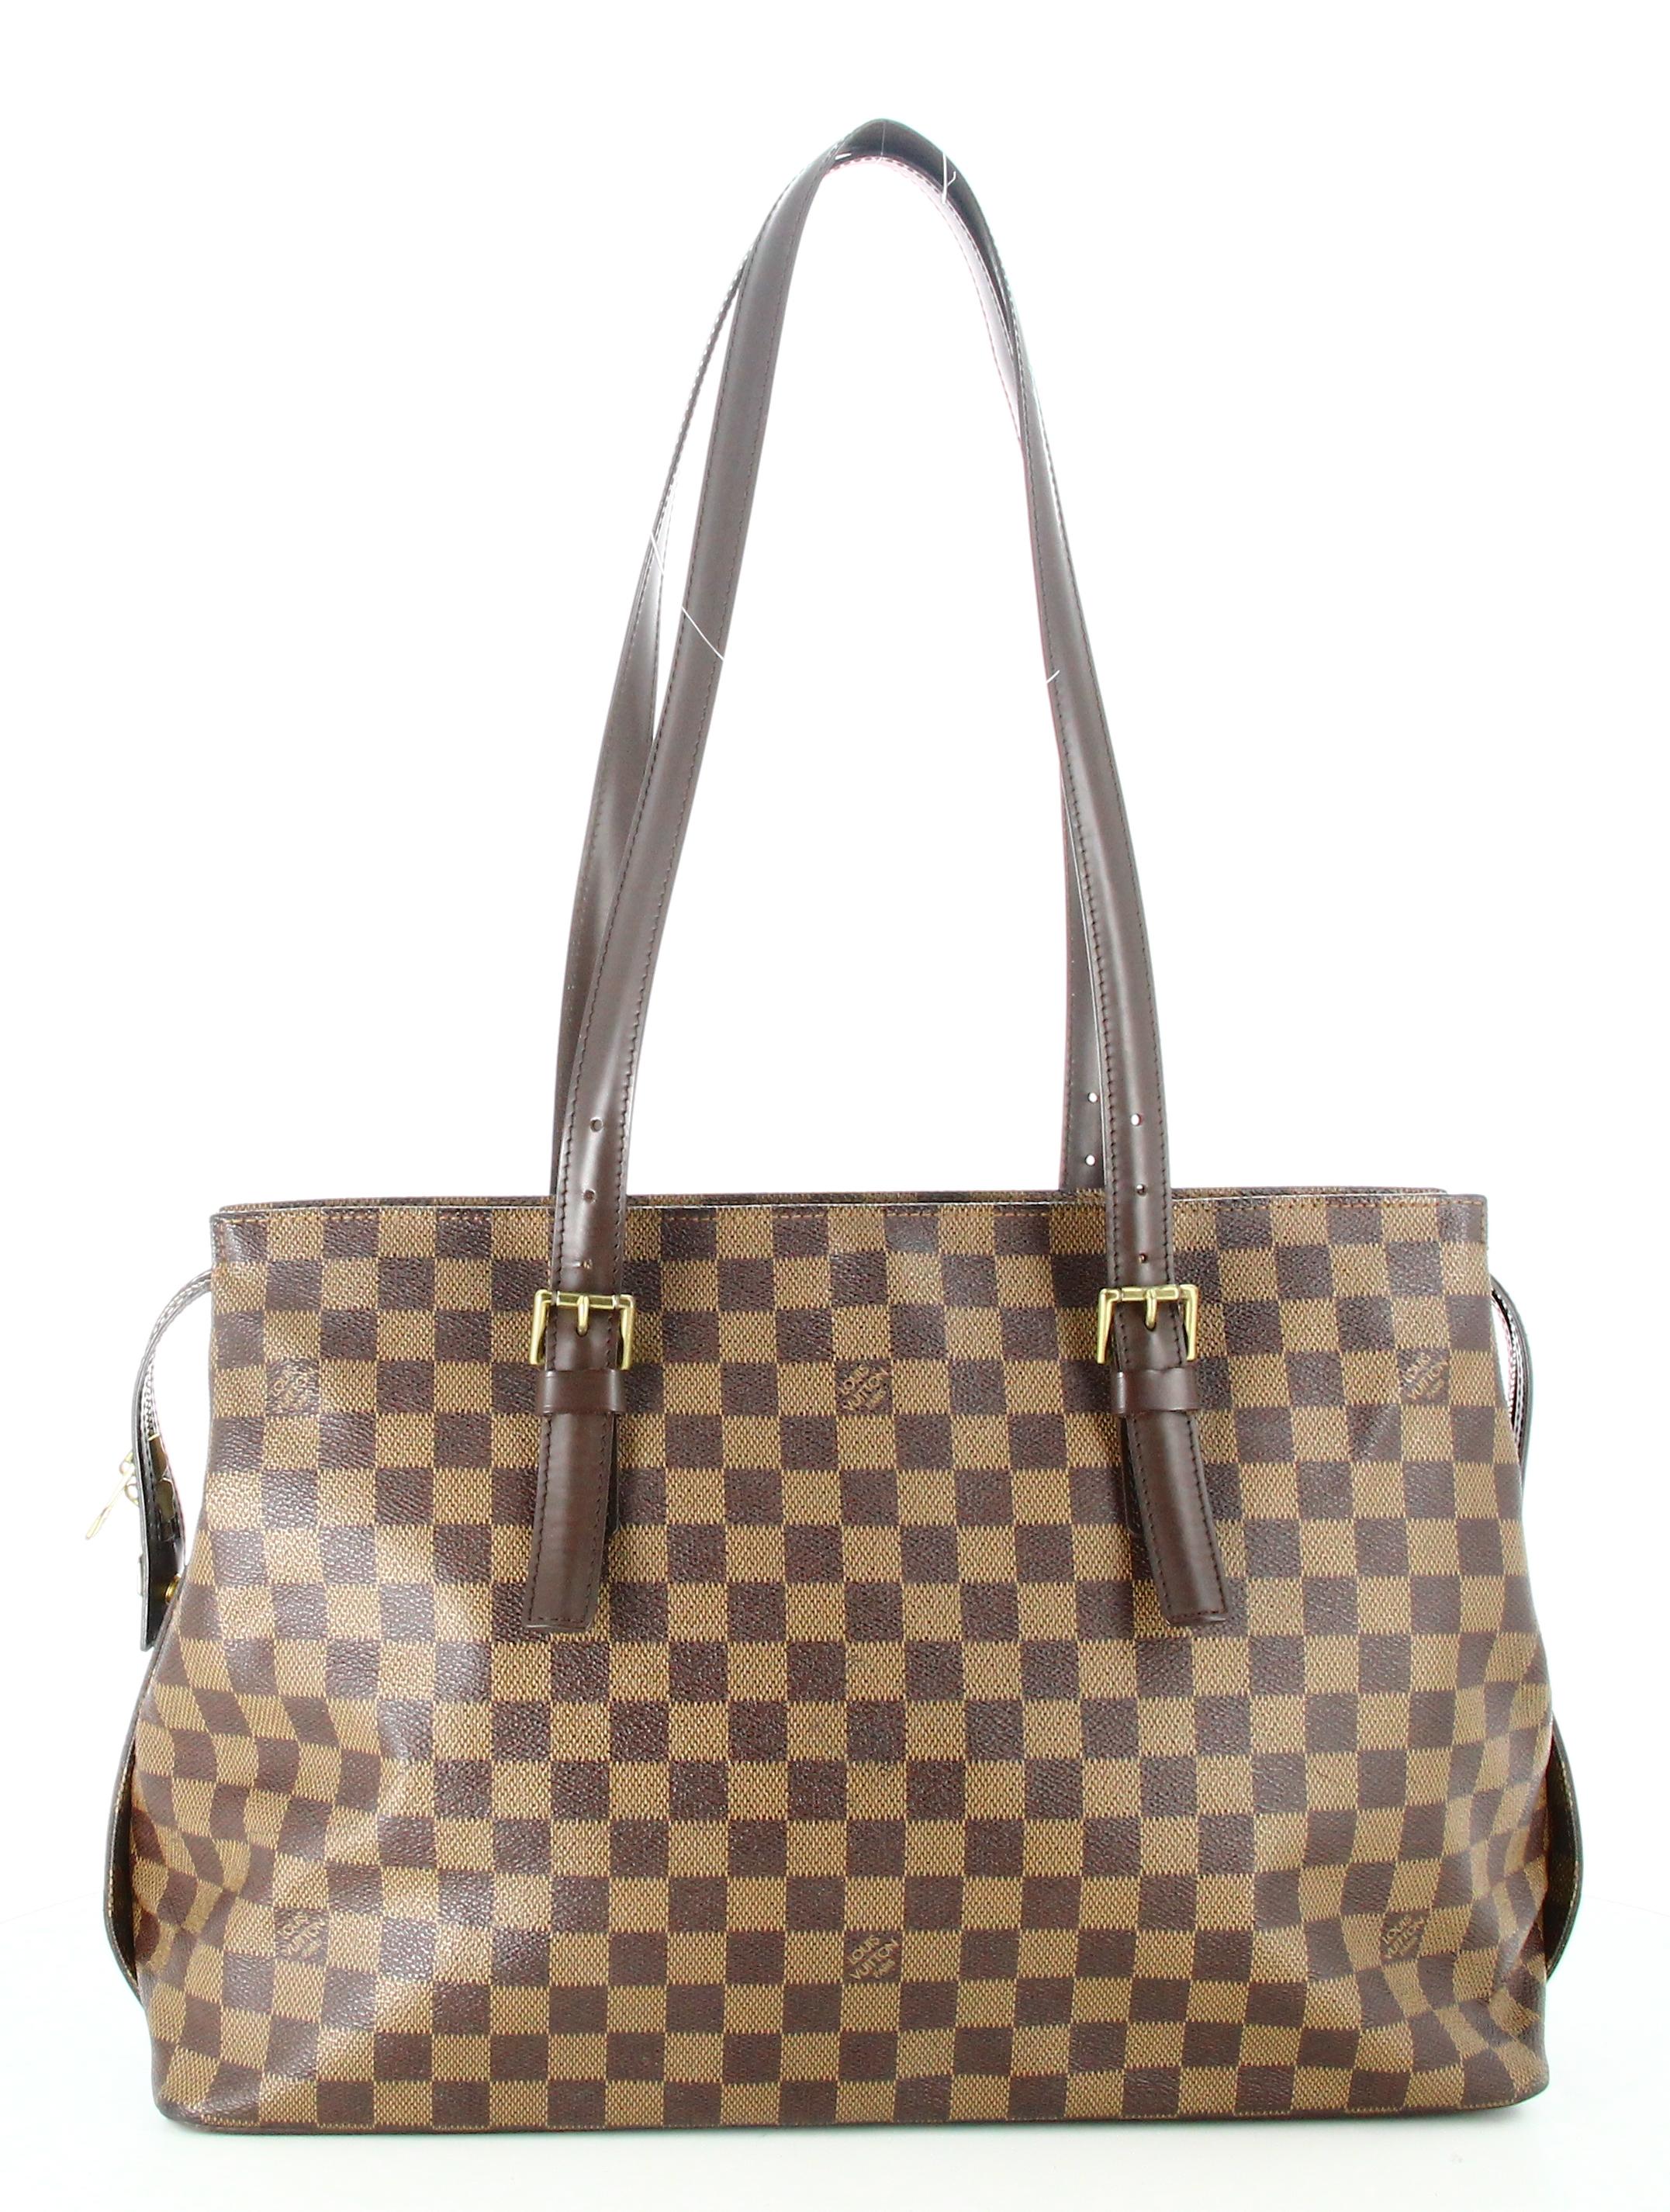 2005 Louis Vuitton Damier Ebene Travel Bag 

- very good condition. shows slight signs of wear over time. 
- Louis Vuitton travel bag 
- Damier Ebene 
- Two brown leather straps 
- Golden zip closure 
- Interior : Red fabric plus small inside pocket